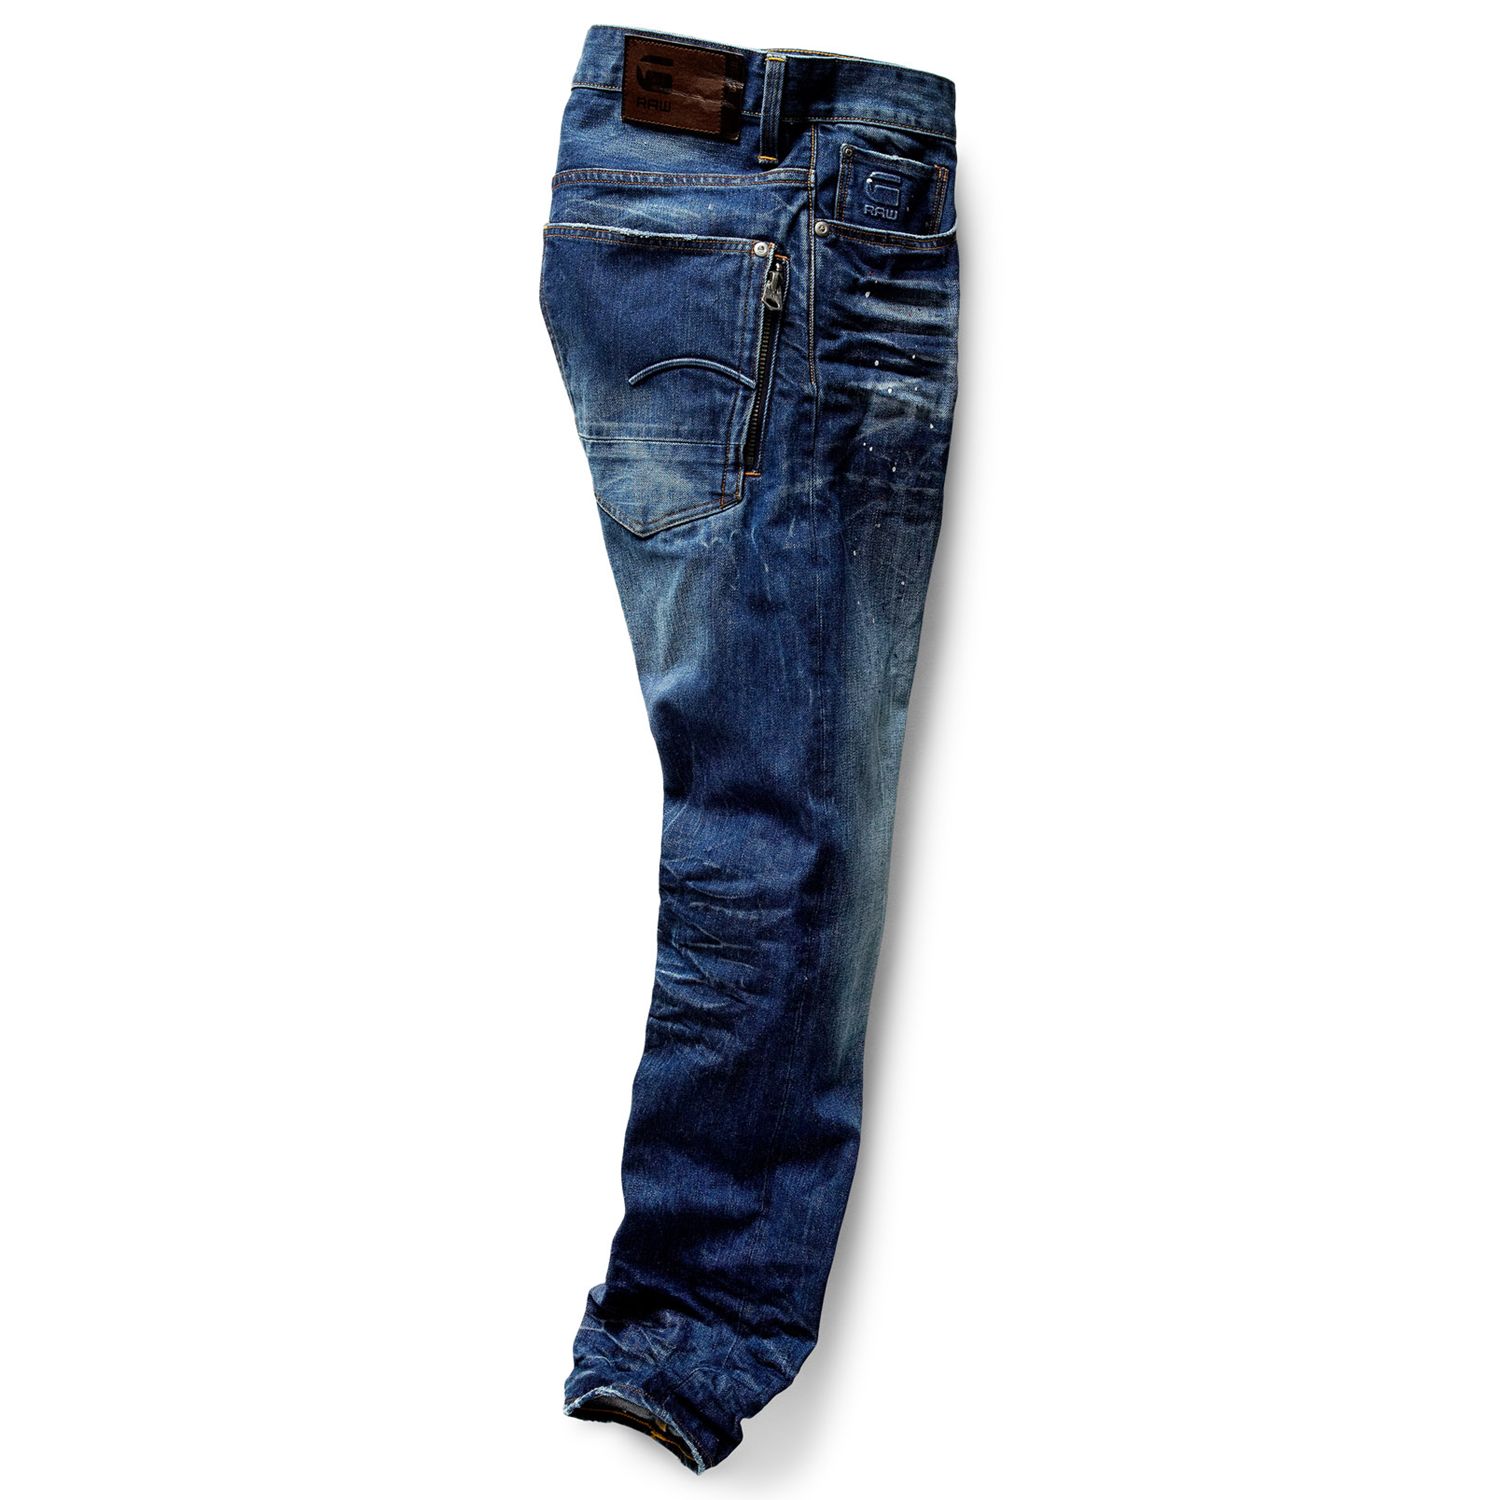 32s jeans